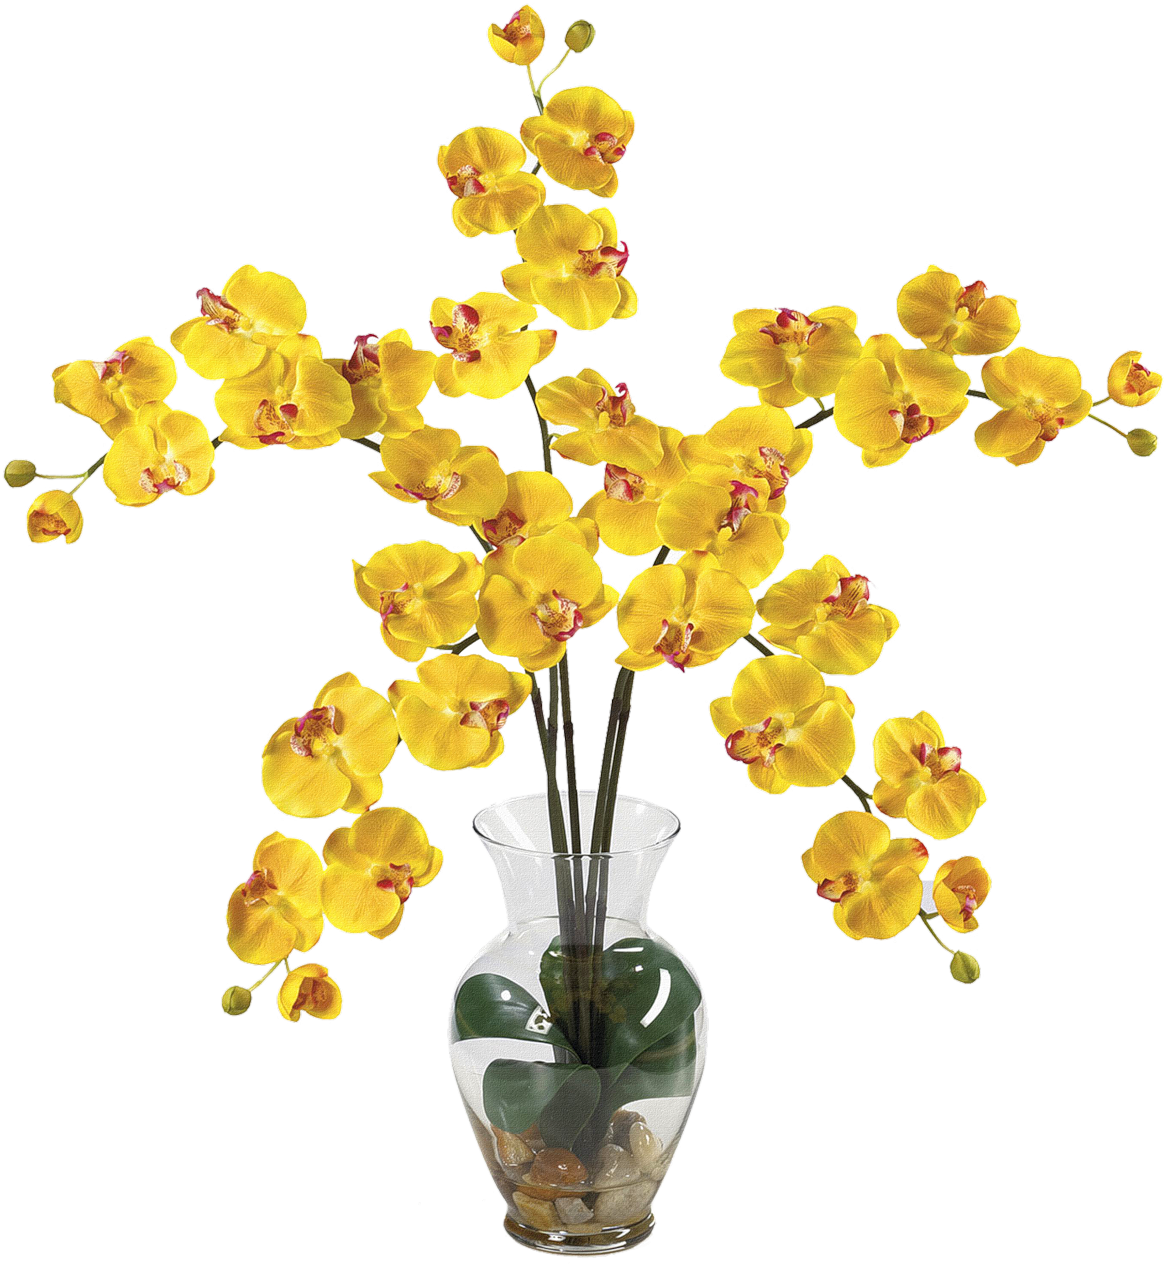 Download A Yellow Flowers In A Vase [100% Free] - FastPNG